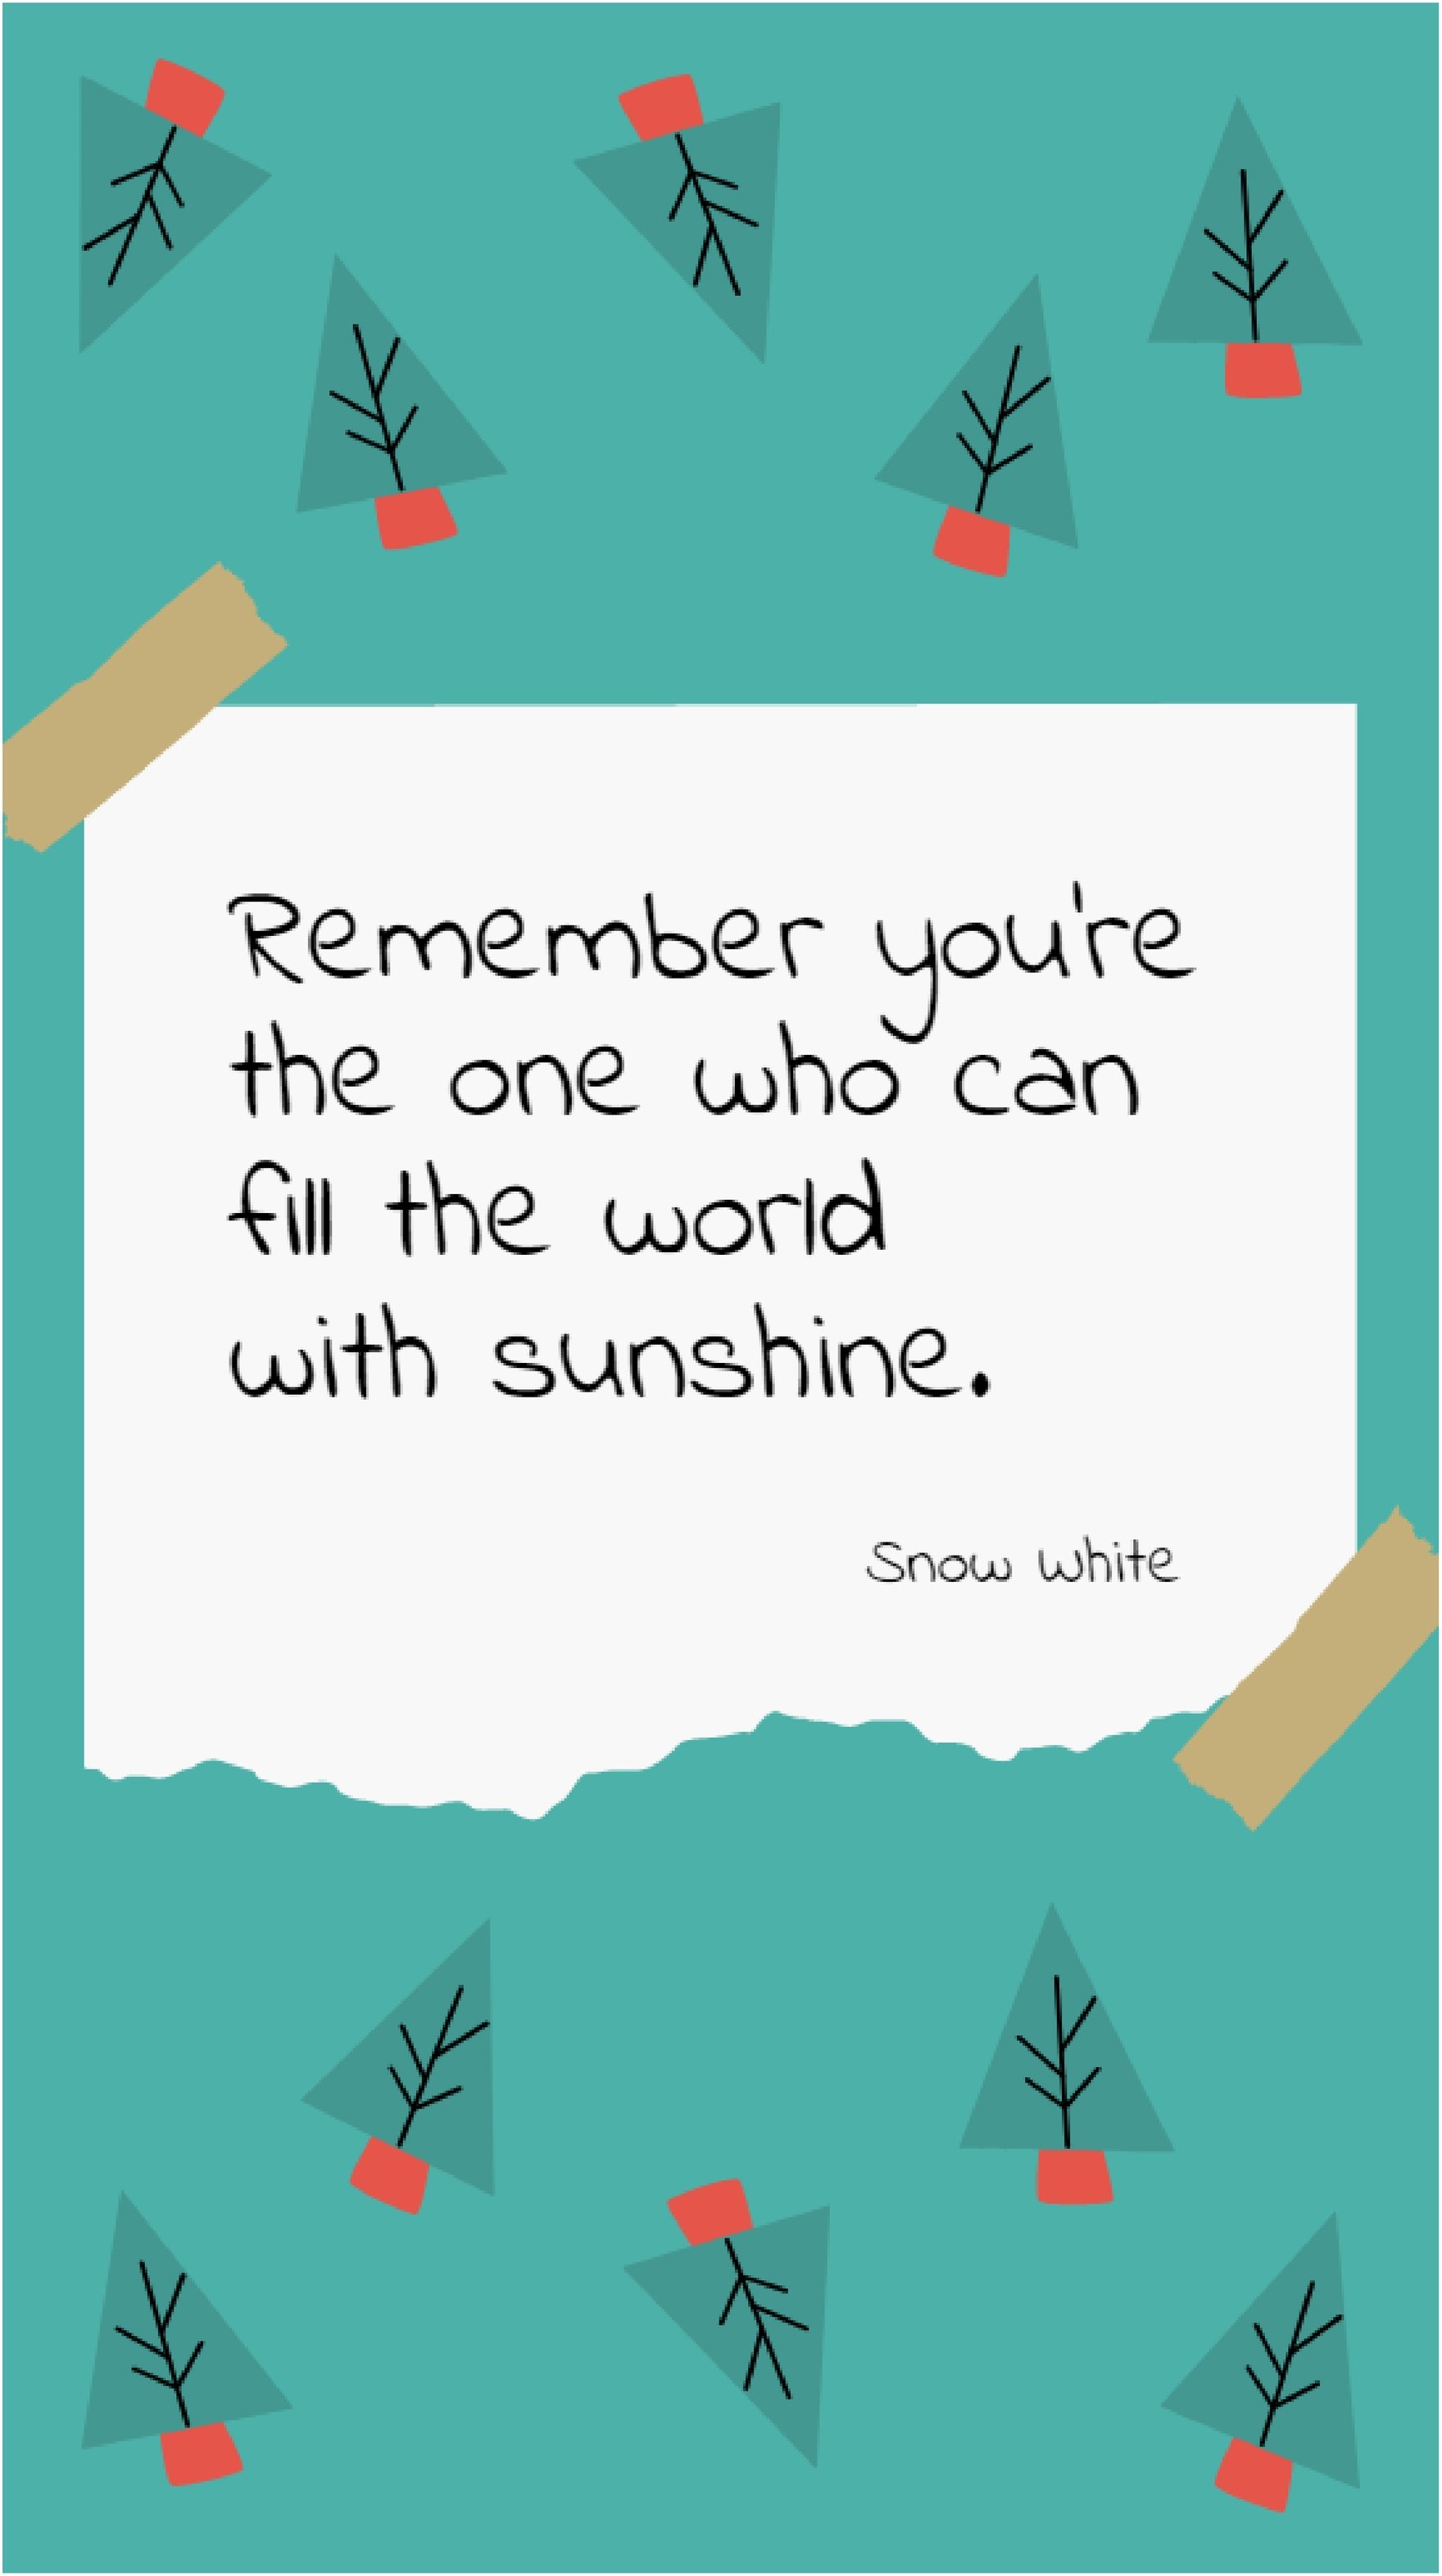 Snow White - Remember you’re the one who can fill the world with sunshine.